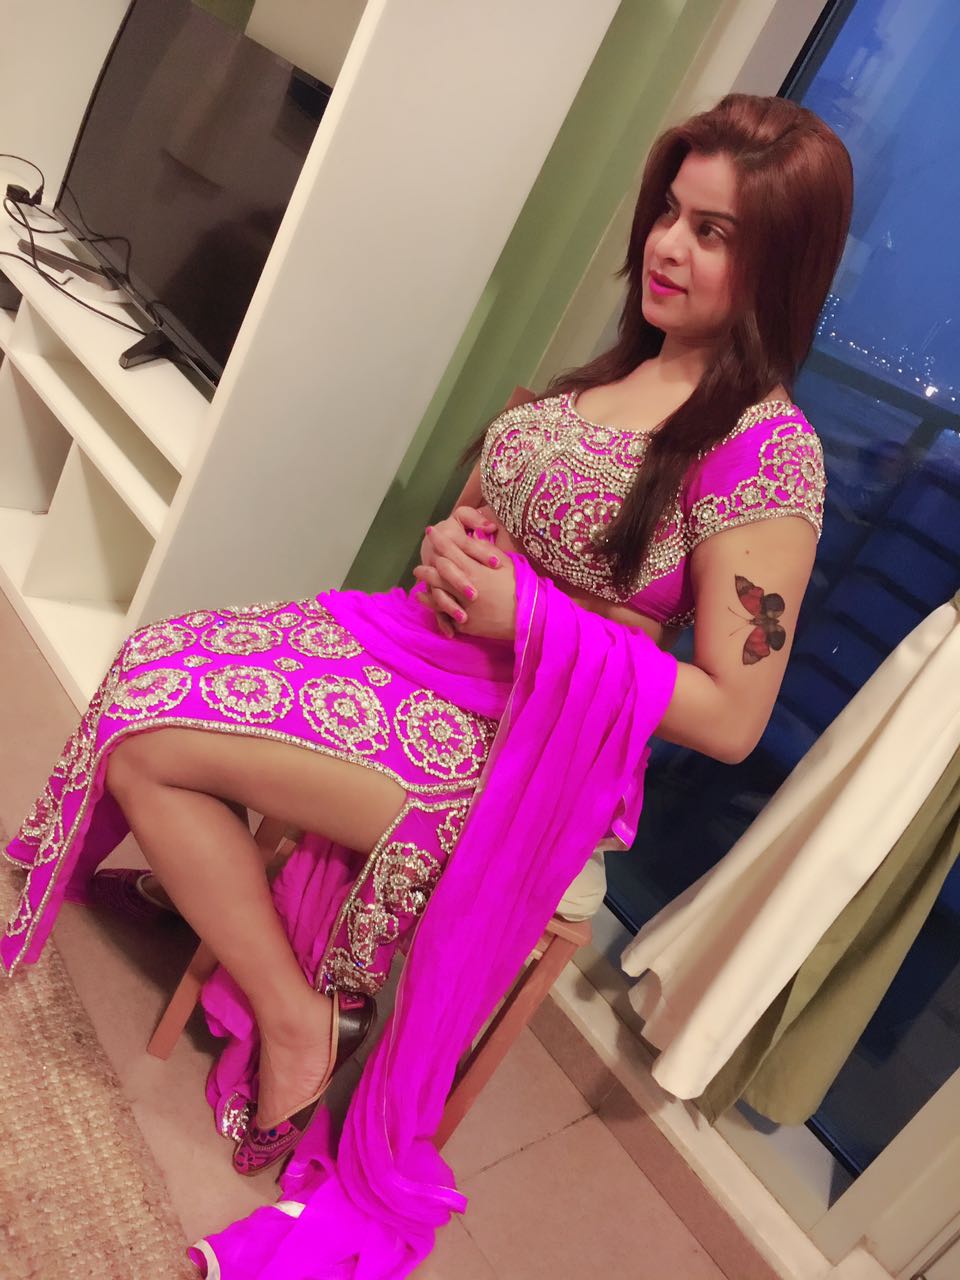 Service available in Banglore all areas call me or WhatsApp only genuine person